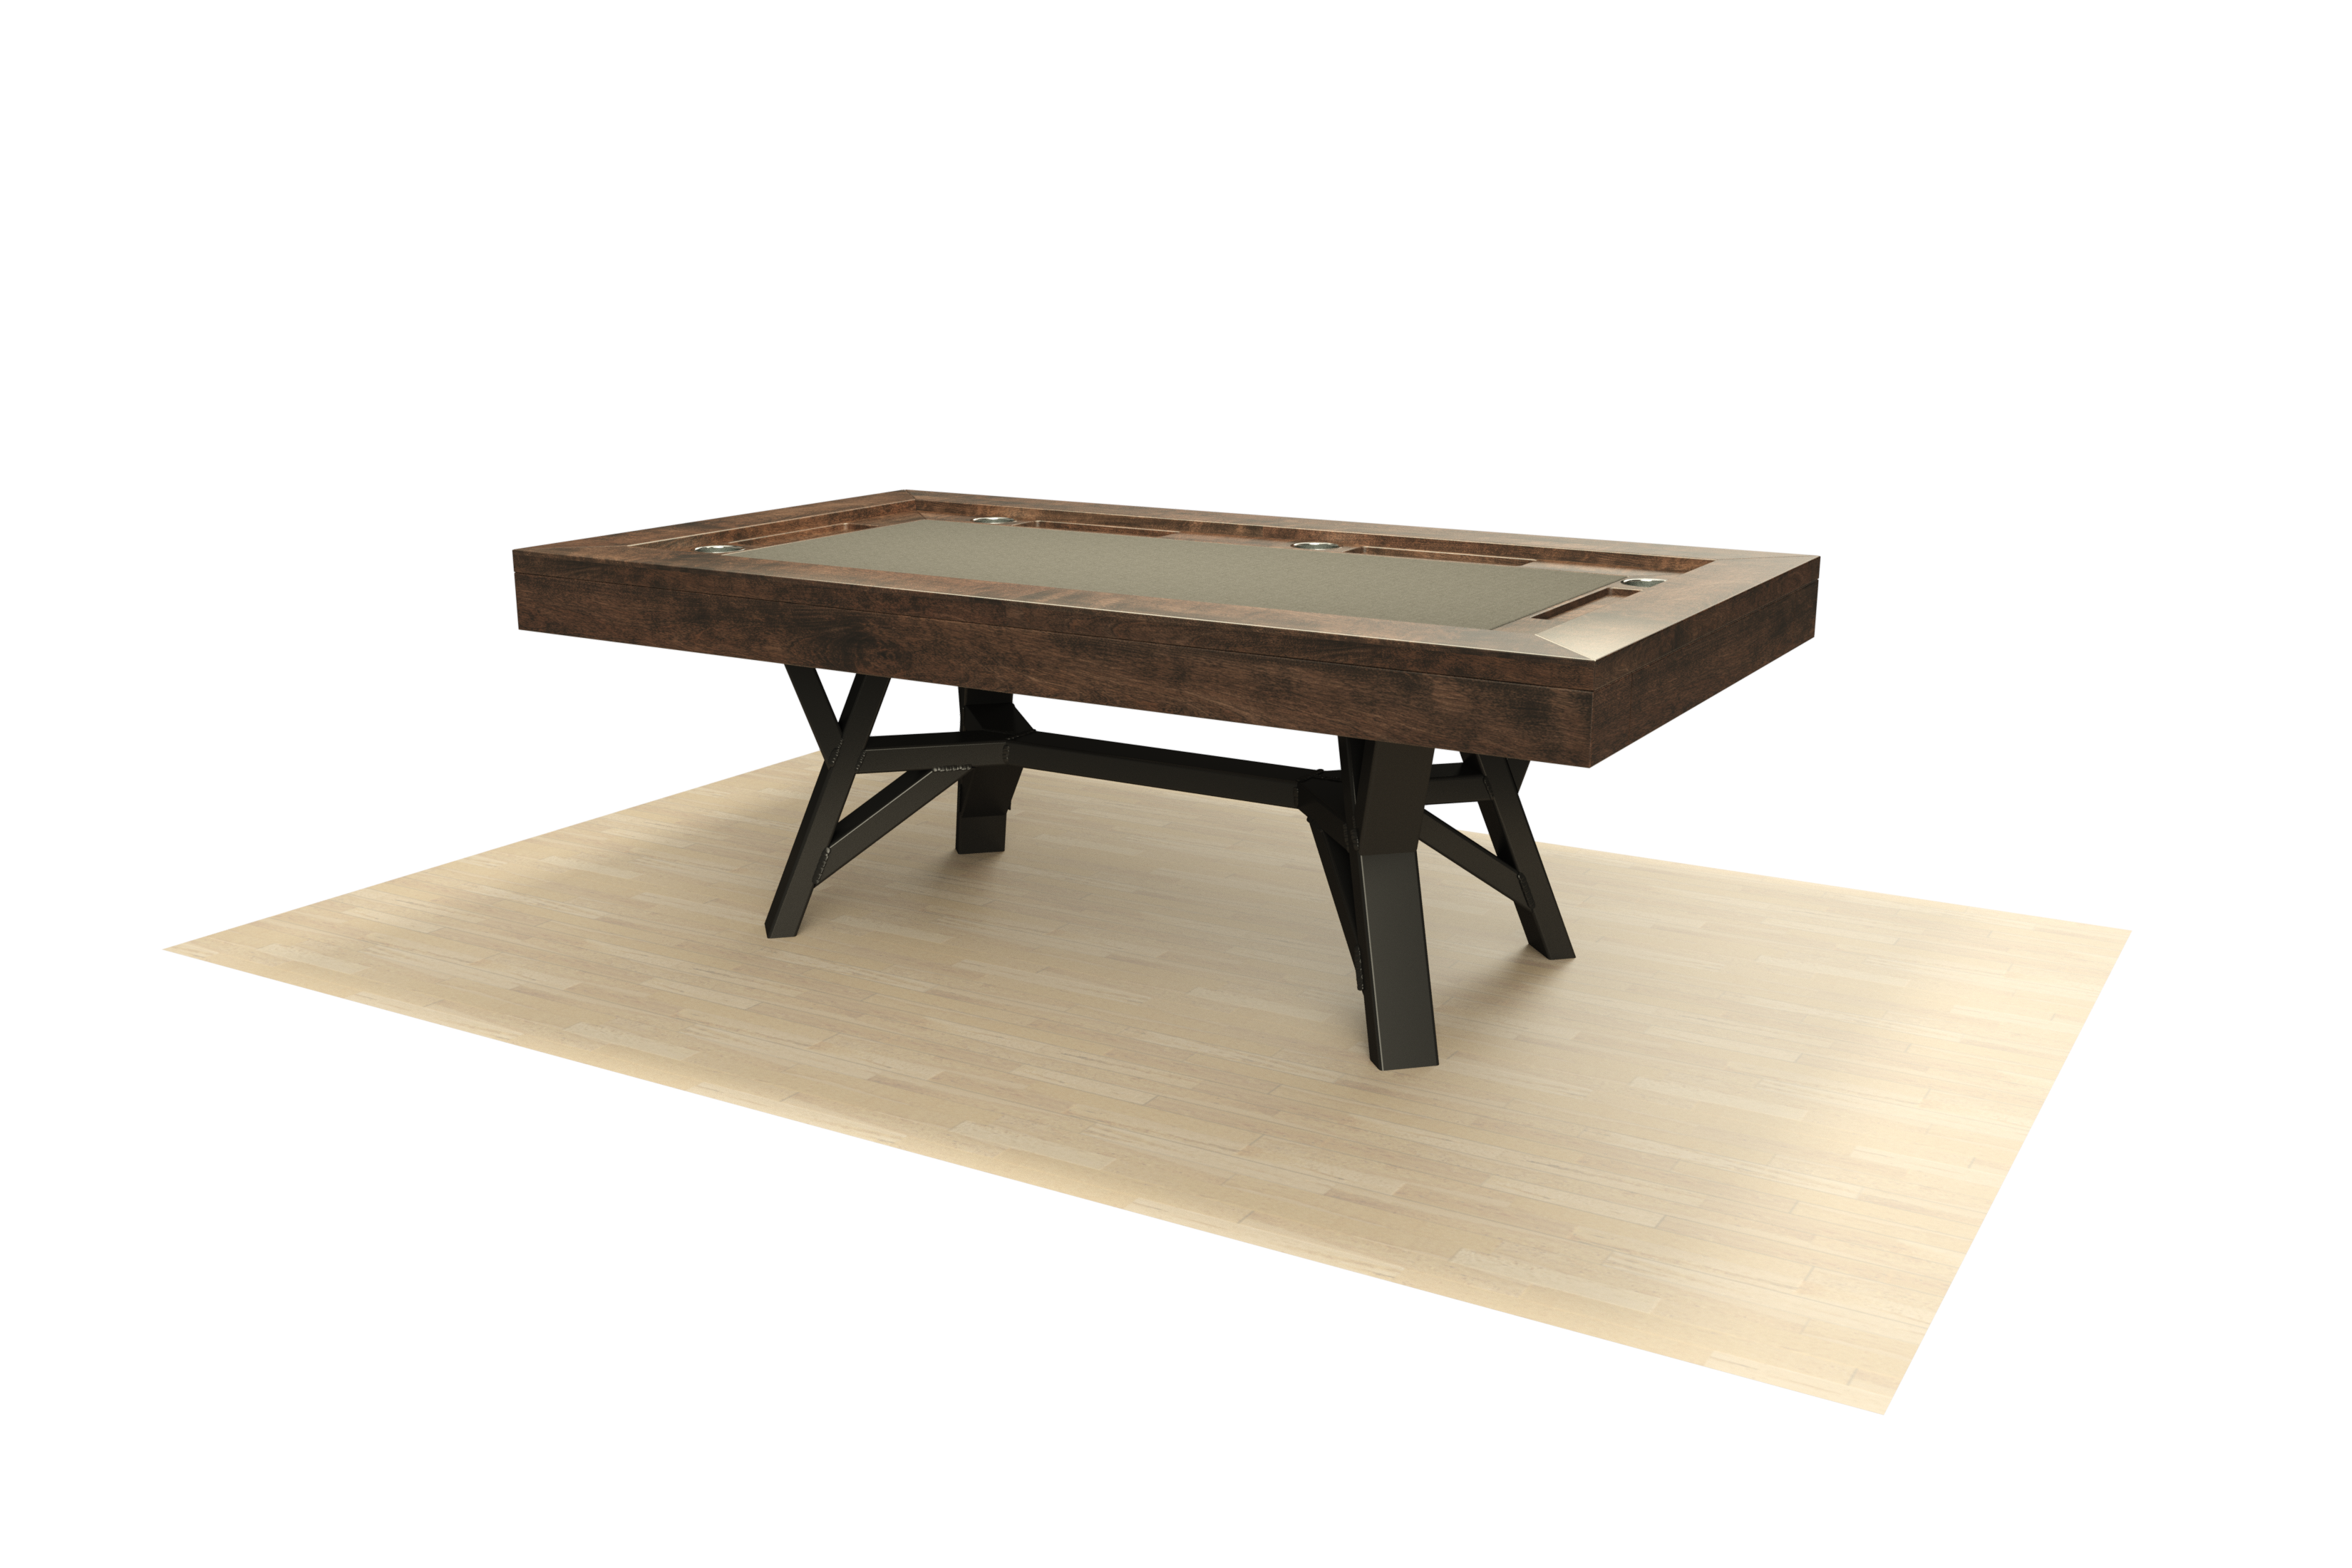 INDUSTRIA GAME TABLE